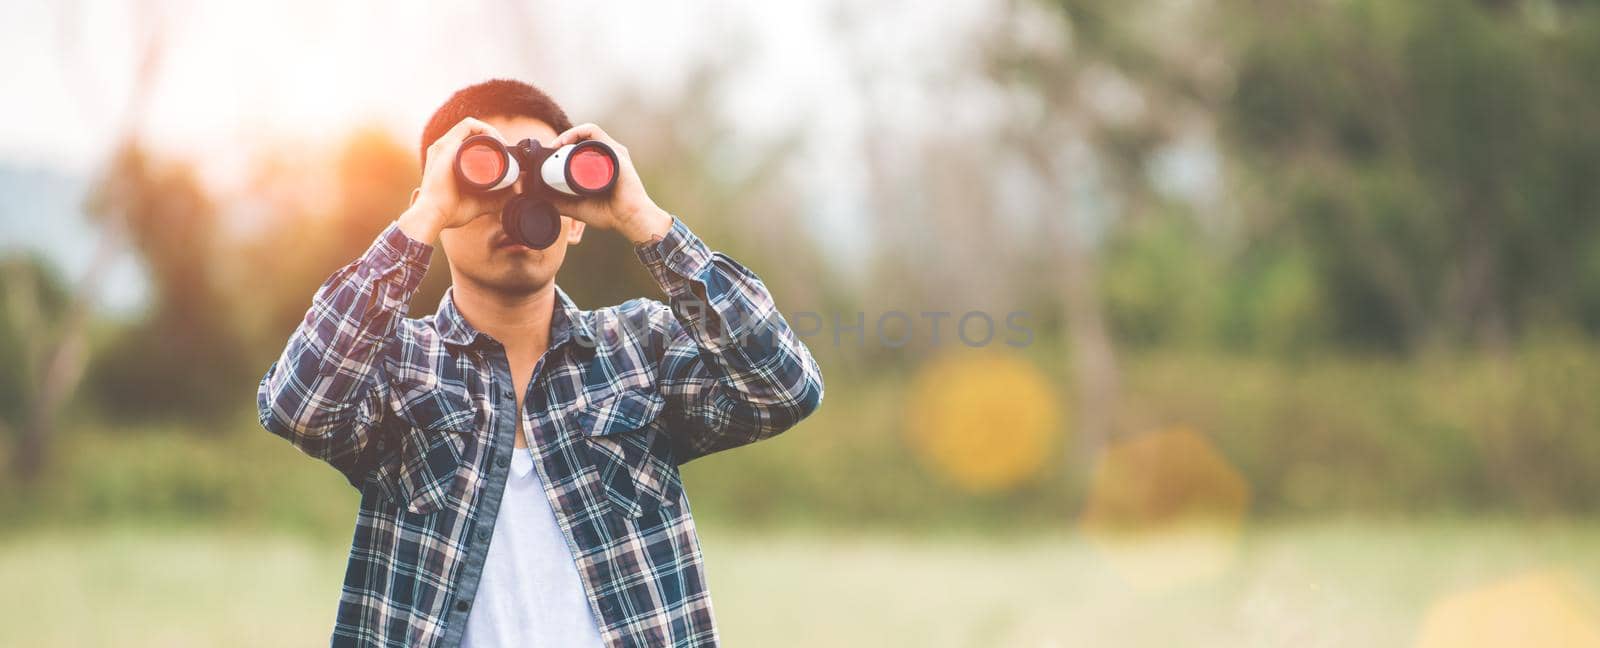 Man with binoculars telescope in forest looking destination as lost people or foreseeable future. People lifestyles and leisure activity concept. Nature and backpacker traveling jungle background by MiniStocker